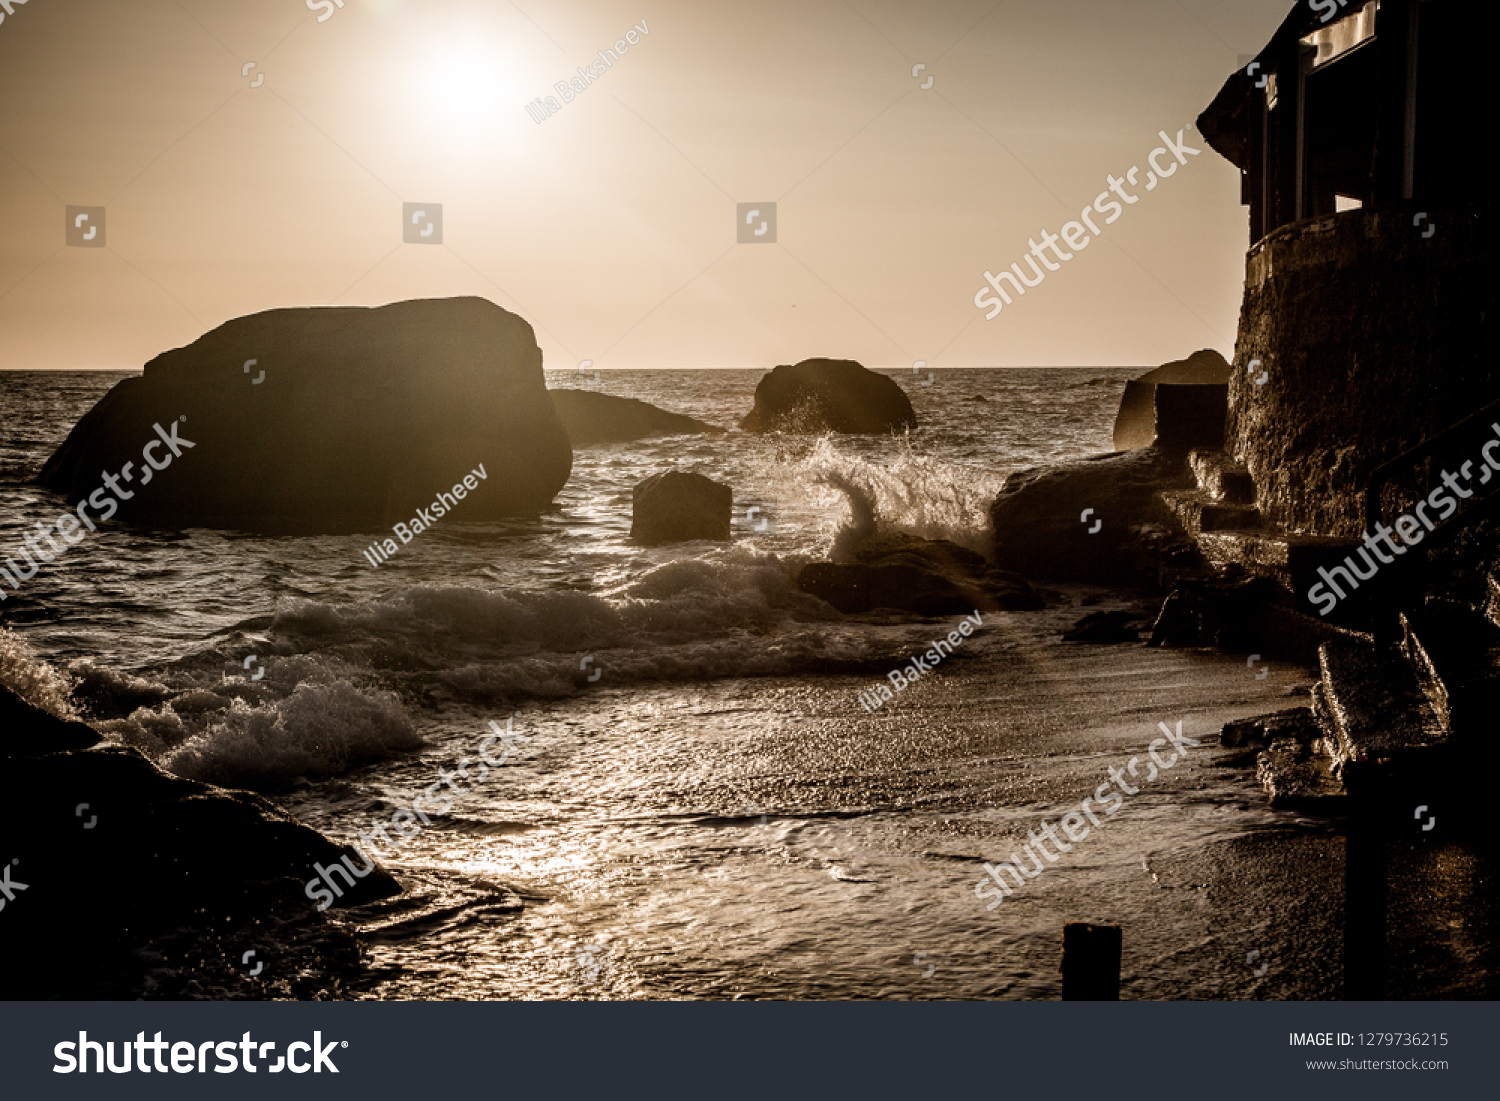 Stormy sea at sunset, the spray of the surf in the setting sun. Ischia Island, Italy.
 #1279736215